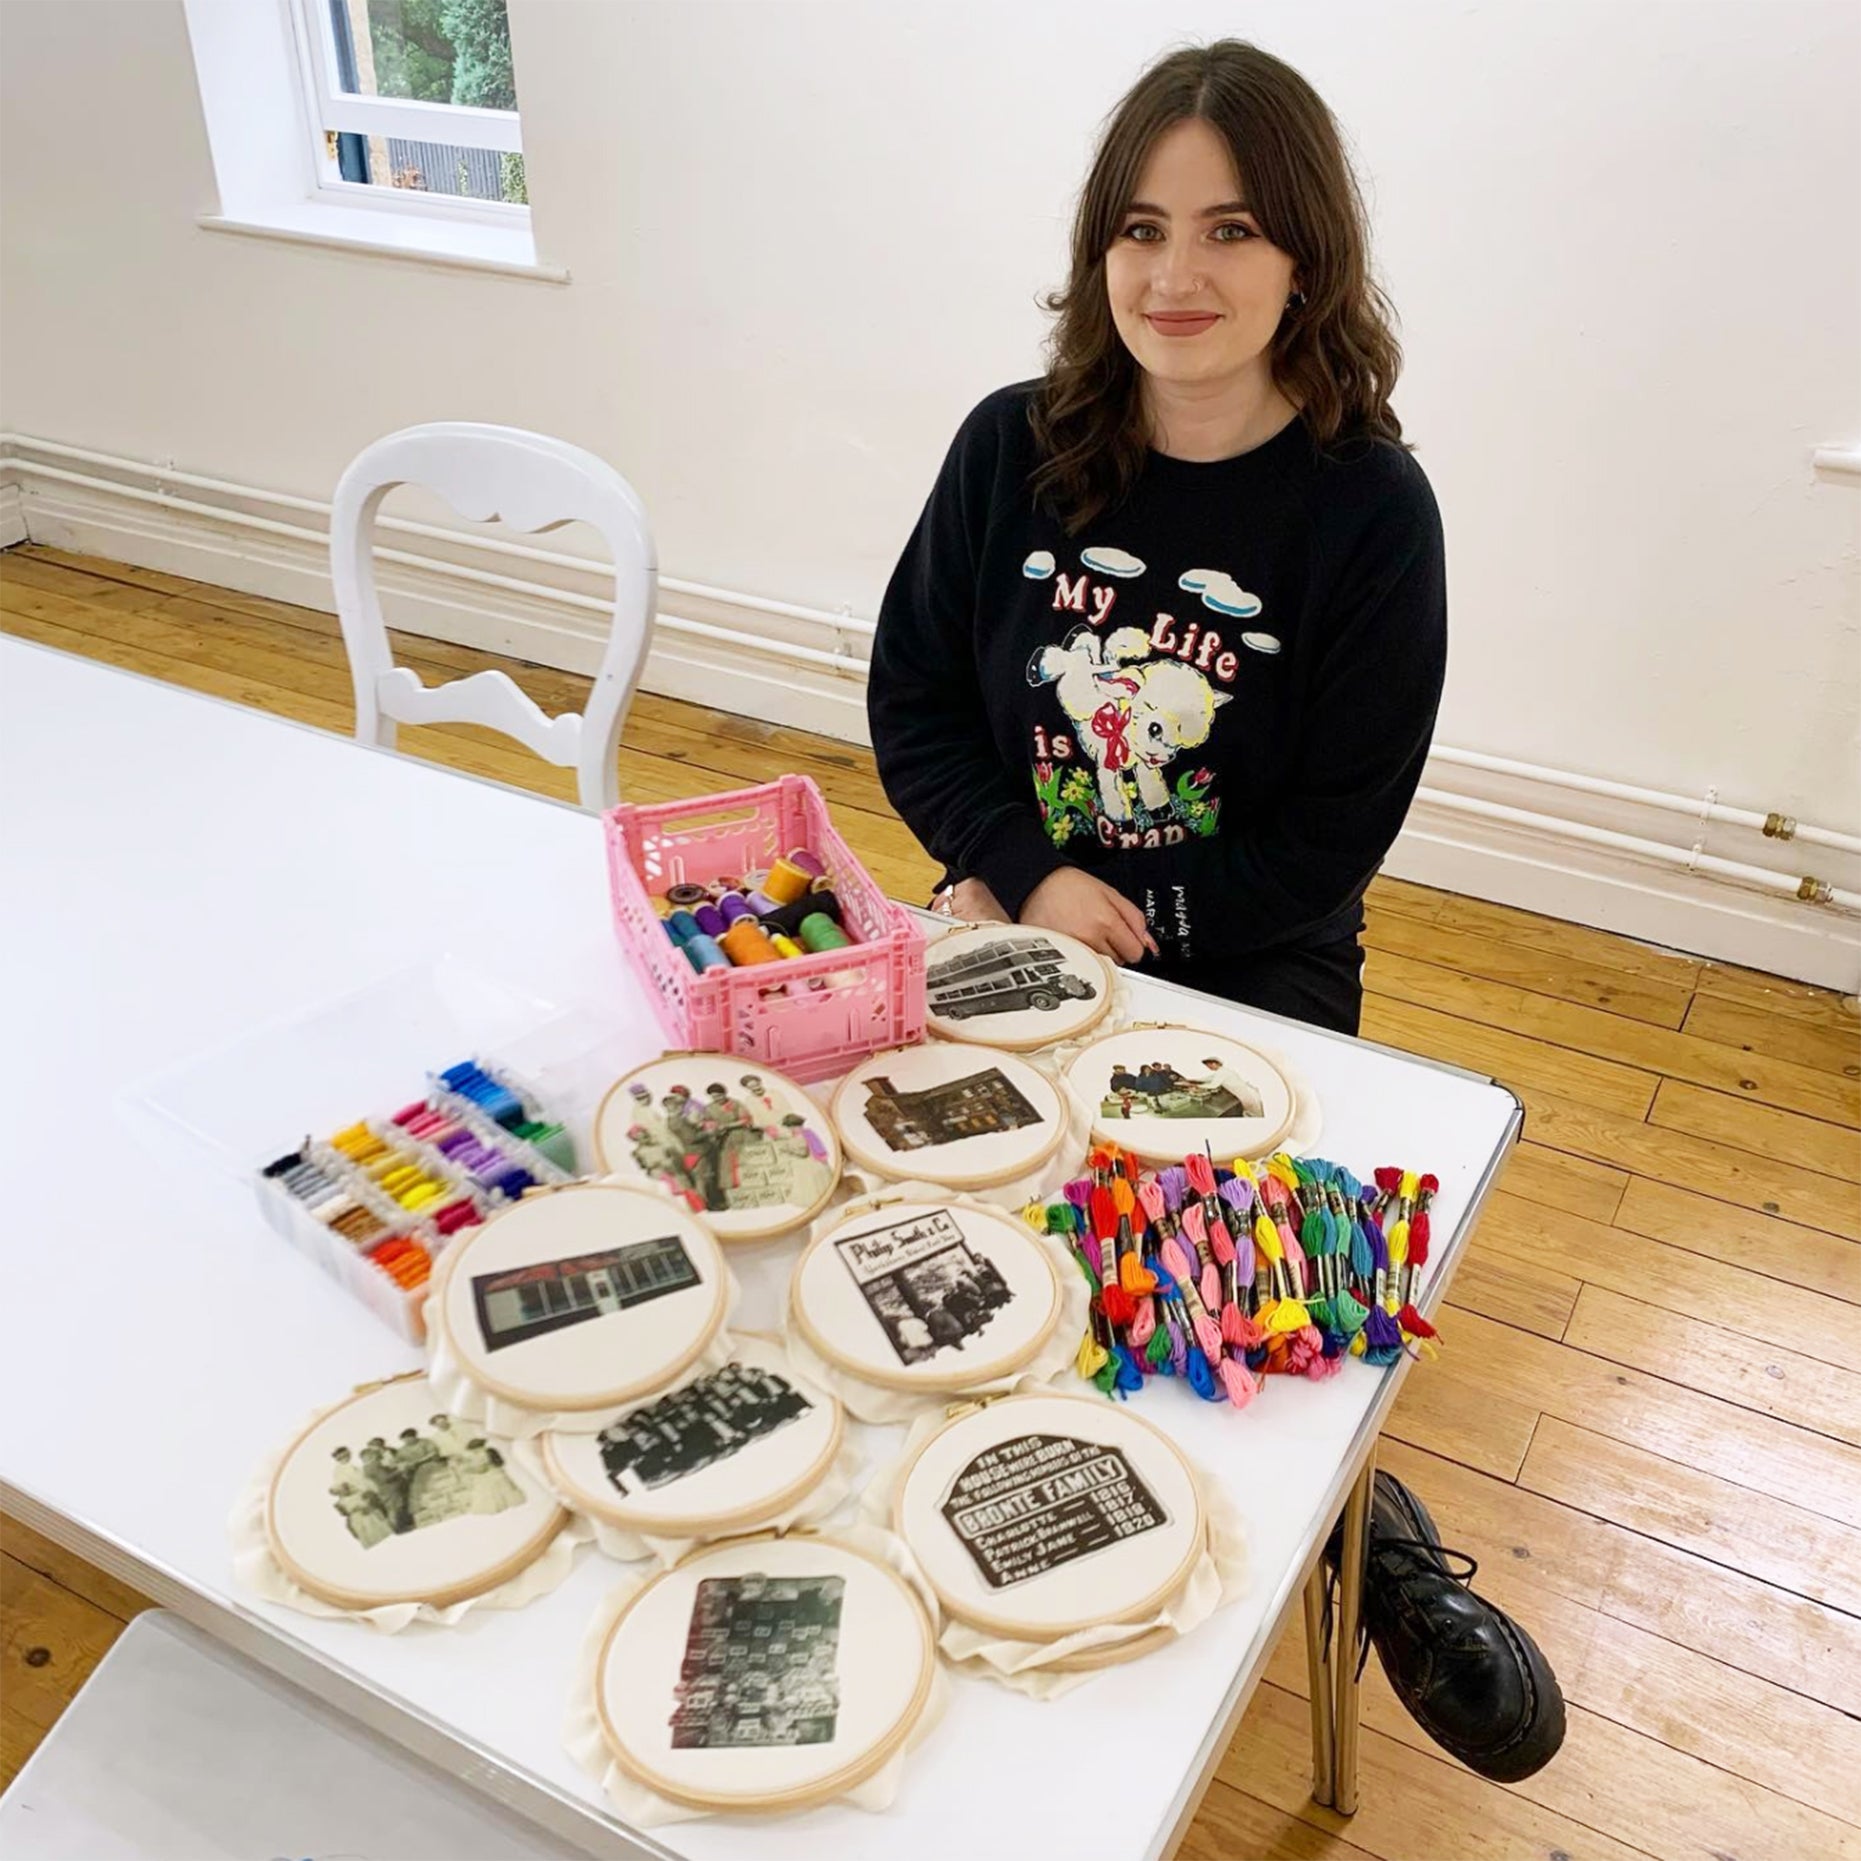 Robyn Nichol, 26, from Keighley in Bradford, creates humorous art works that include some of her favourite food memories. (Robyn Nichol/PA)